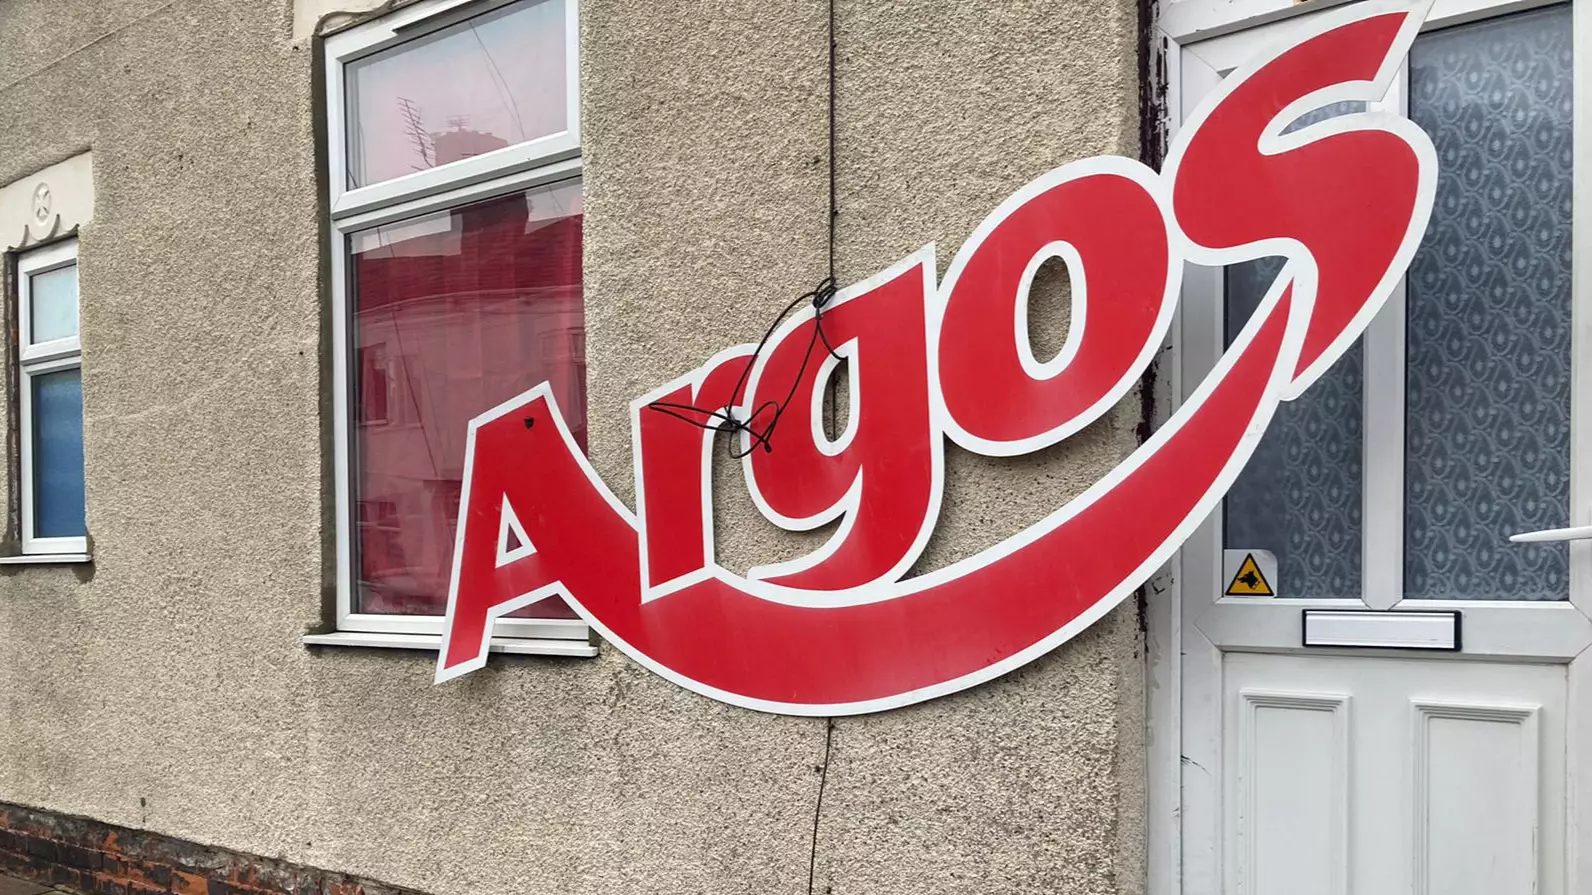 Man Shocked After Finding Huge Argos Sign Outside His House